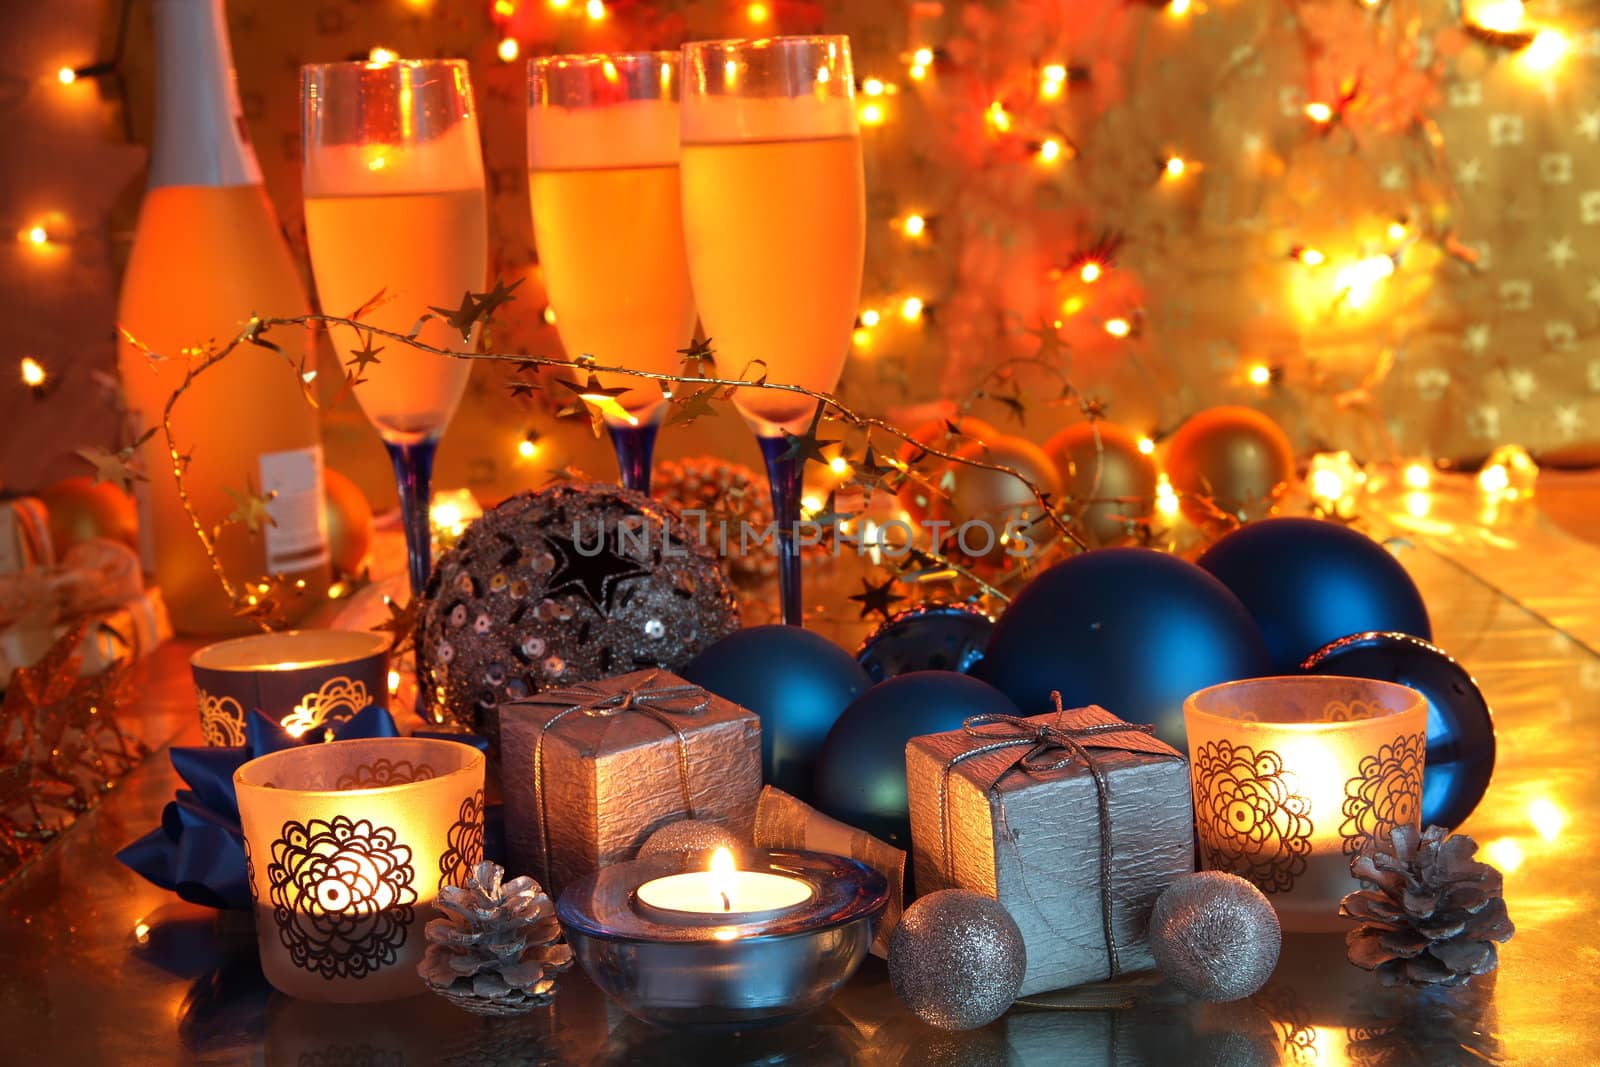 Champagne in glasses,candle lights,gifts,baubles and bluured lights on golden background.